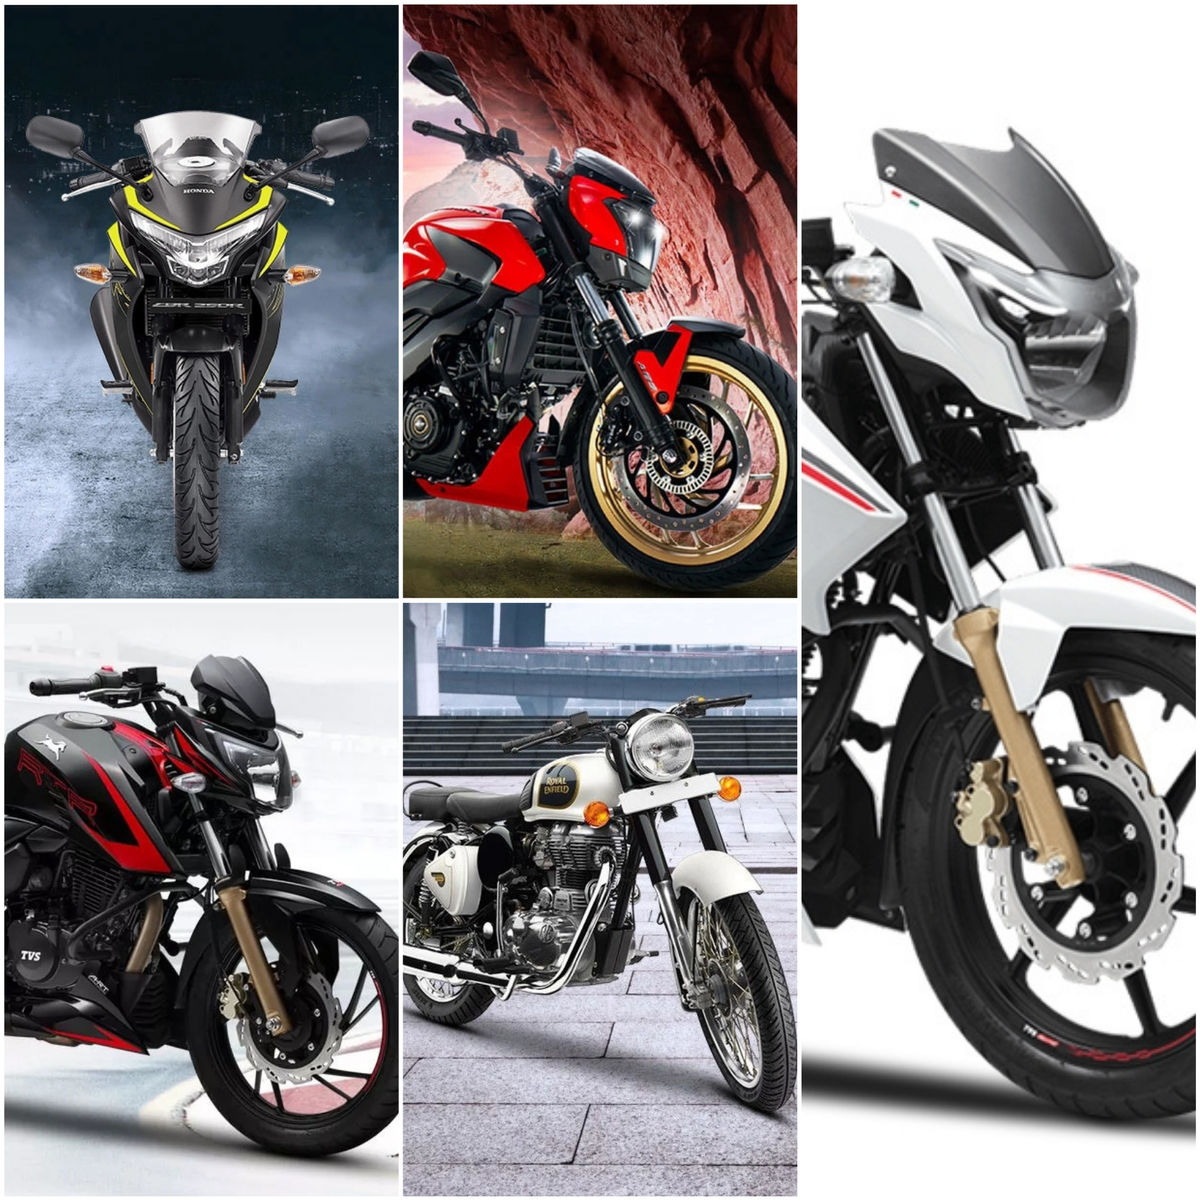 Dual-Channel ABS-equipped Bikes Under Rs 2 lakh: Dual-Channel ABS-equipped Bikes Under Rs 2 lakh: